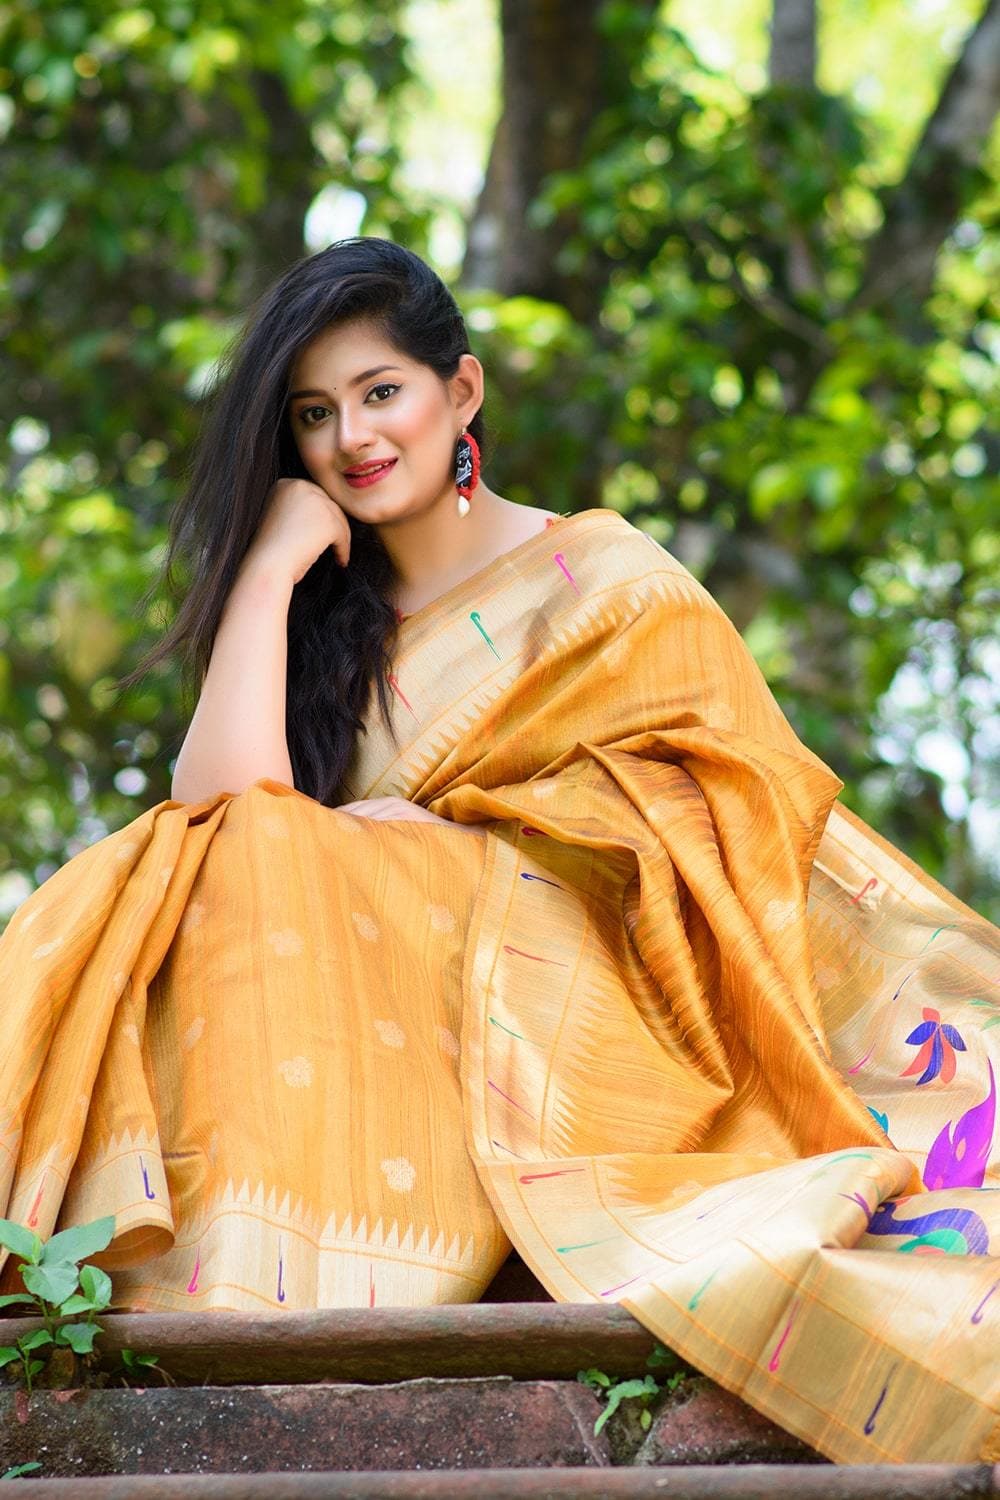 How to give a pose for photos in a saree - Quora